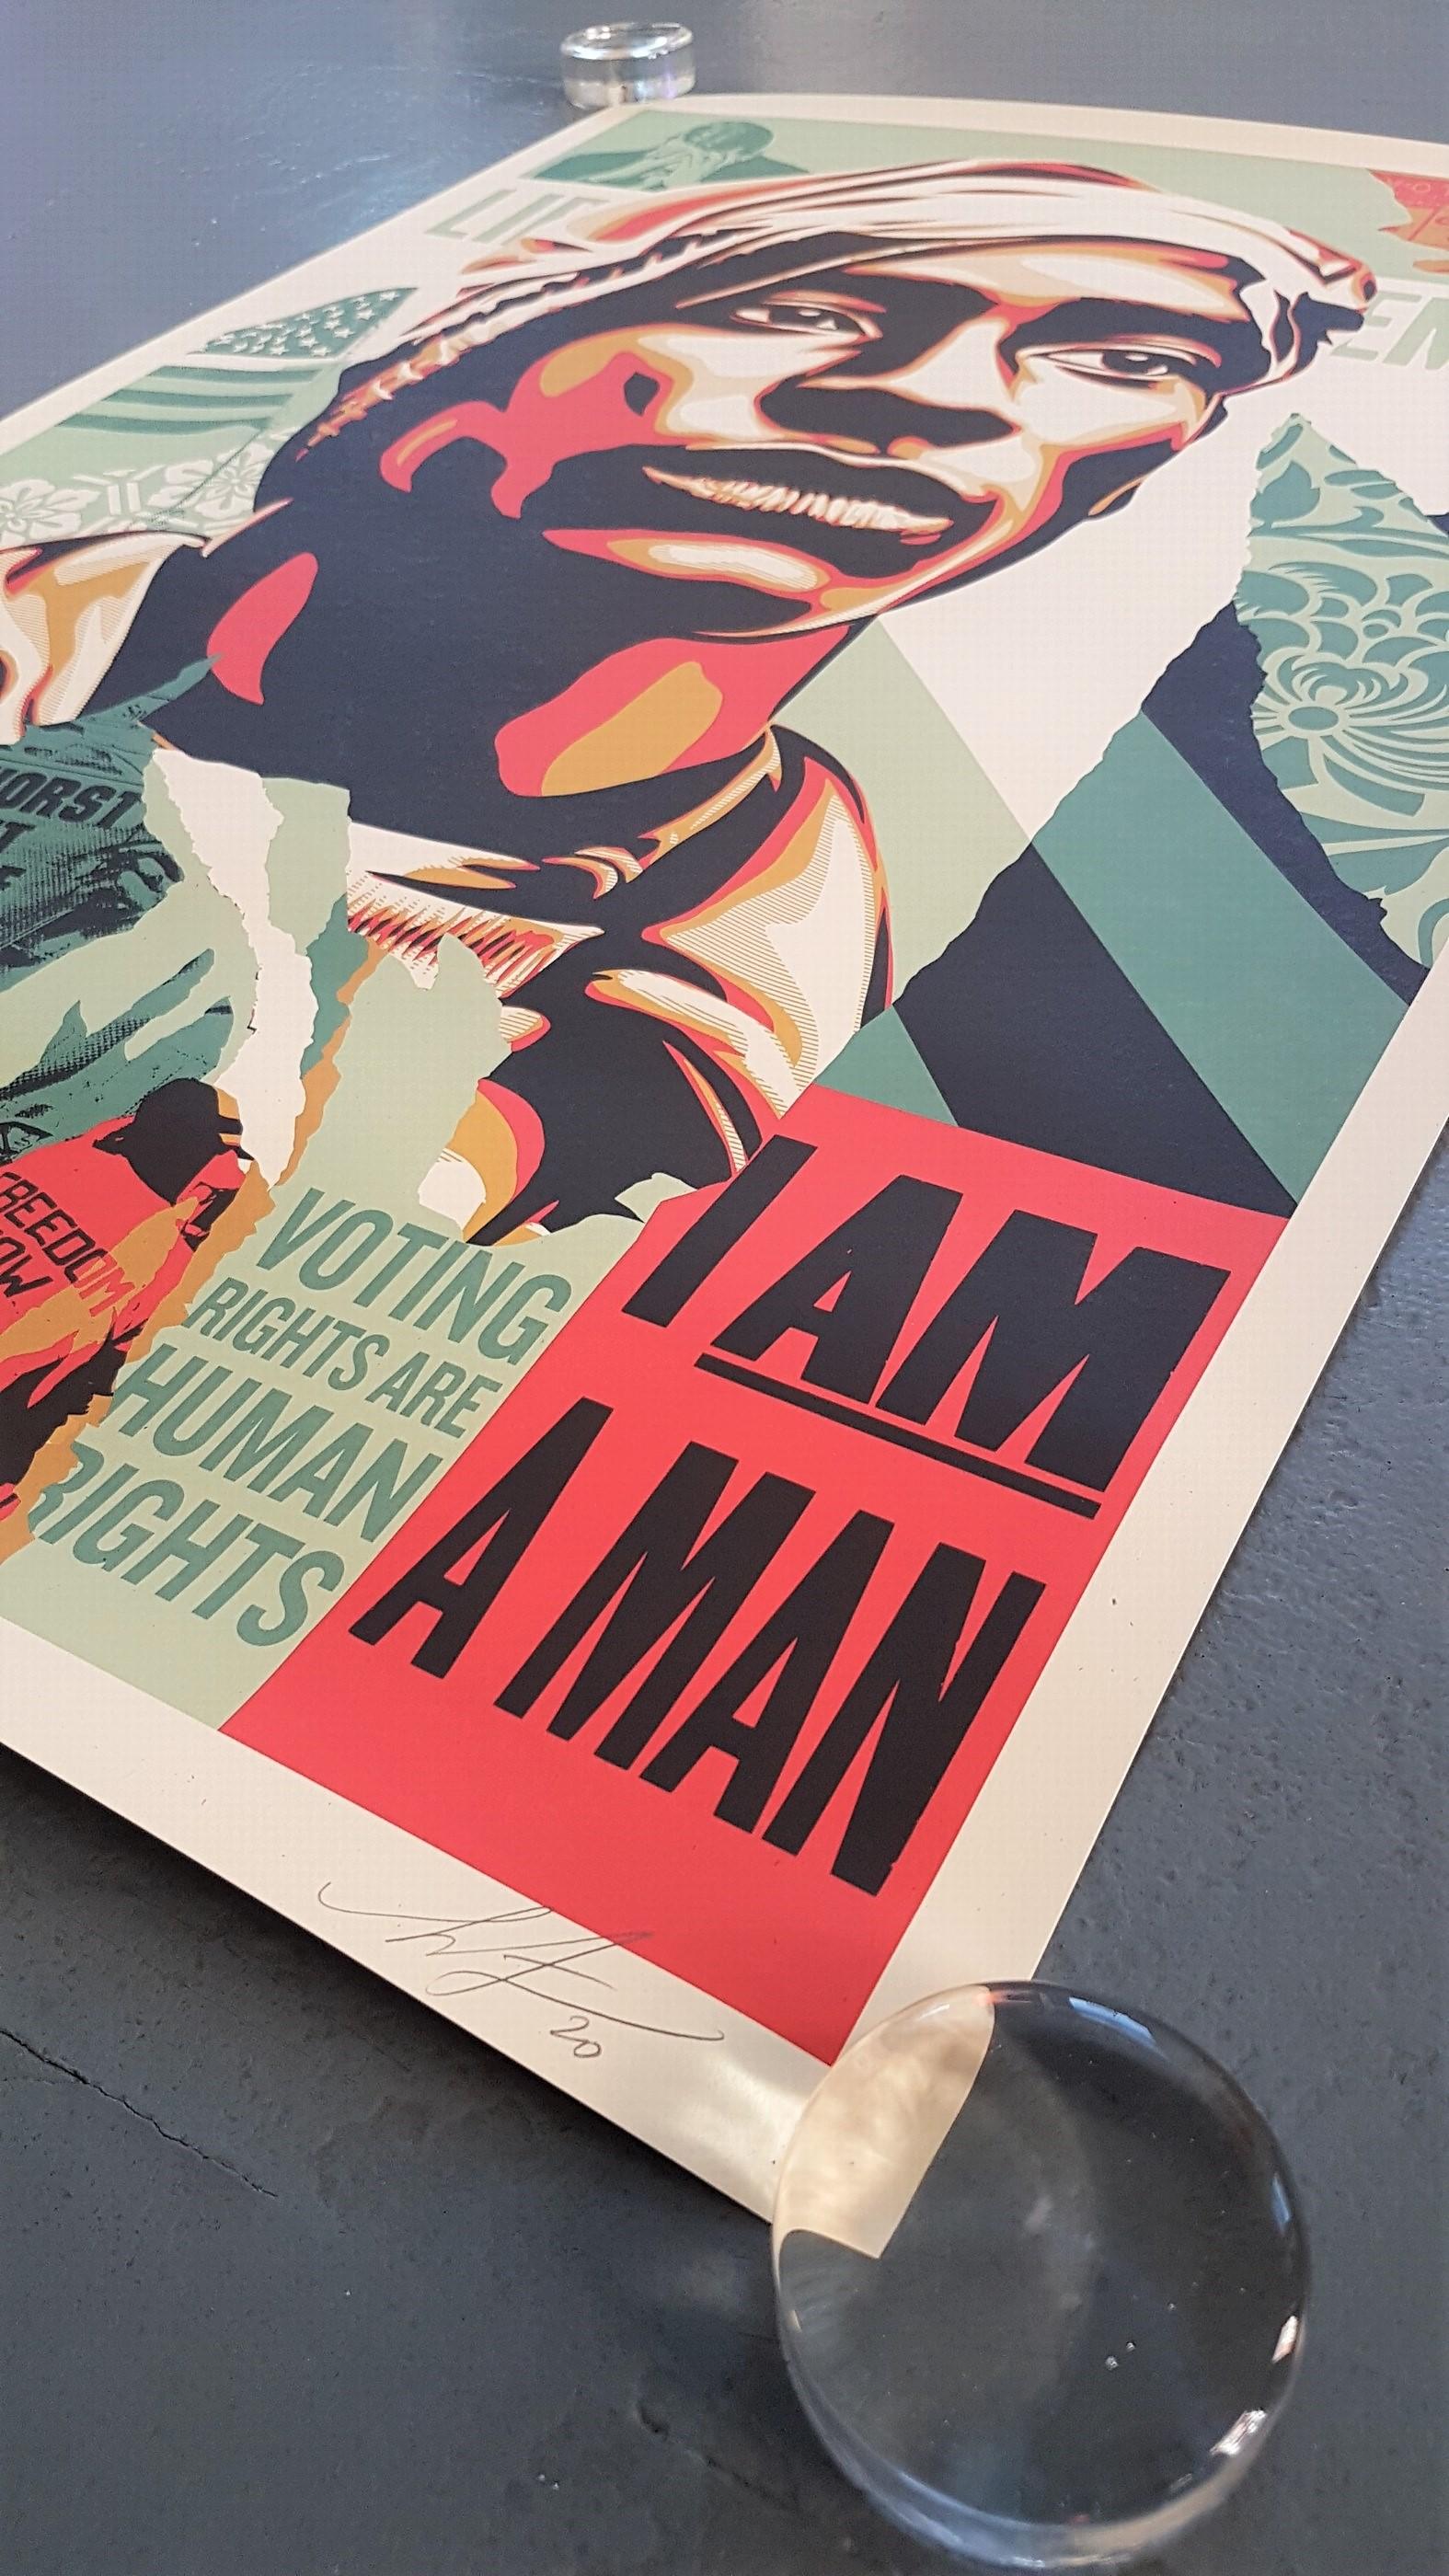 Voting Rights are Human Rights  - Contemporary Print by Shepard Fairey